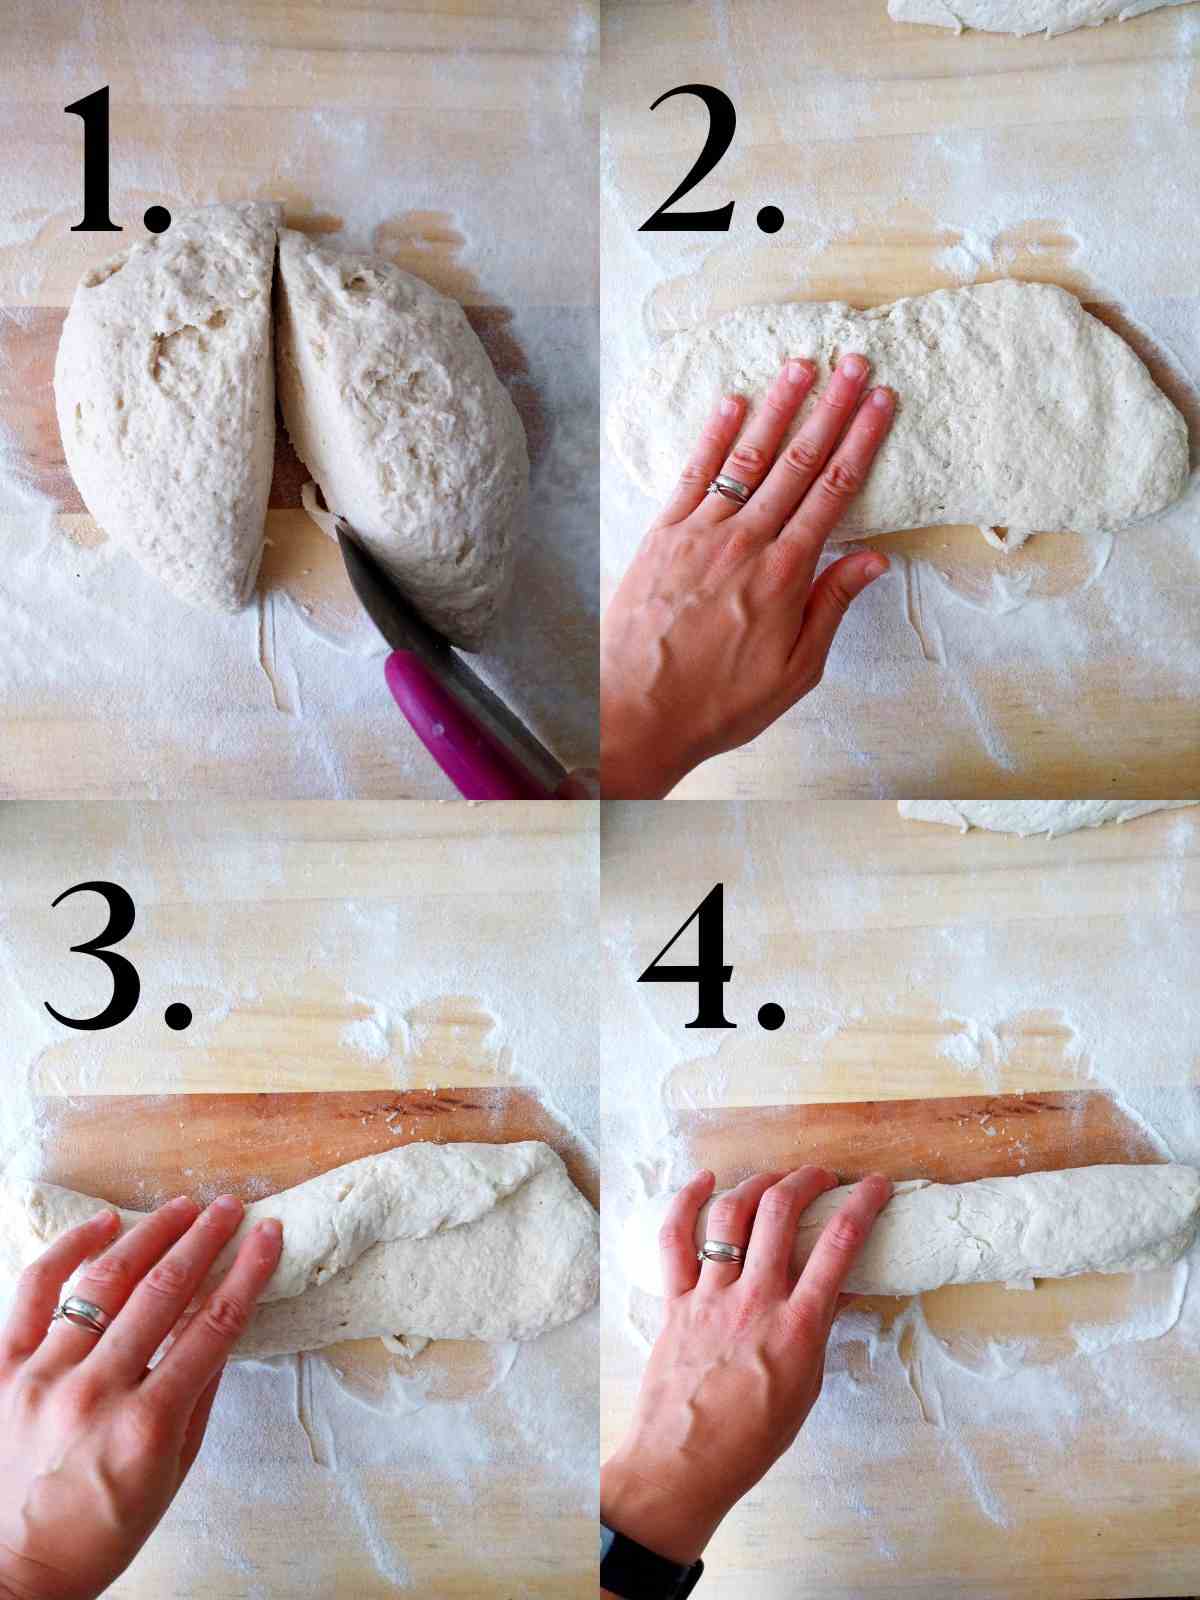 Four stages of shaping the French bread by hand.